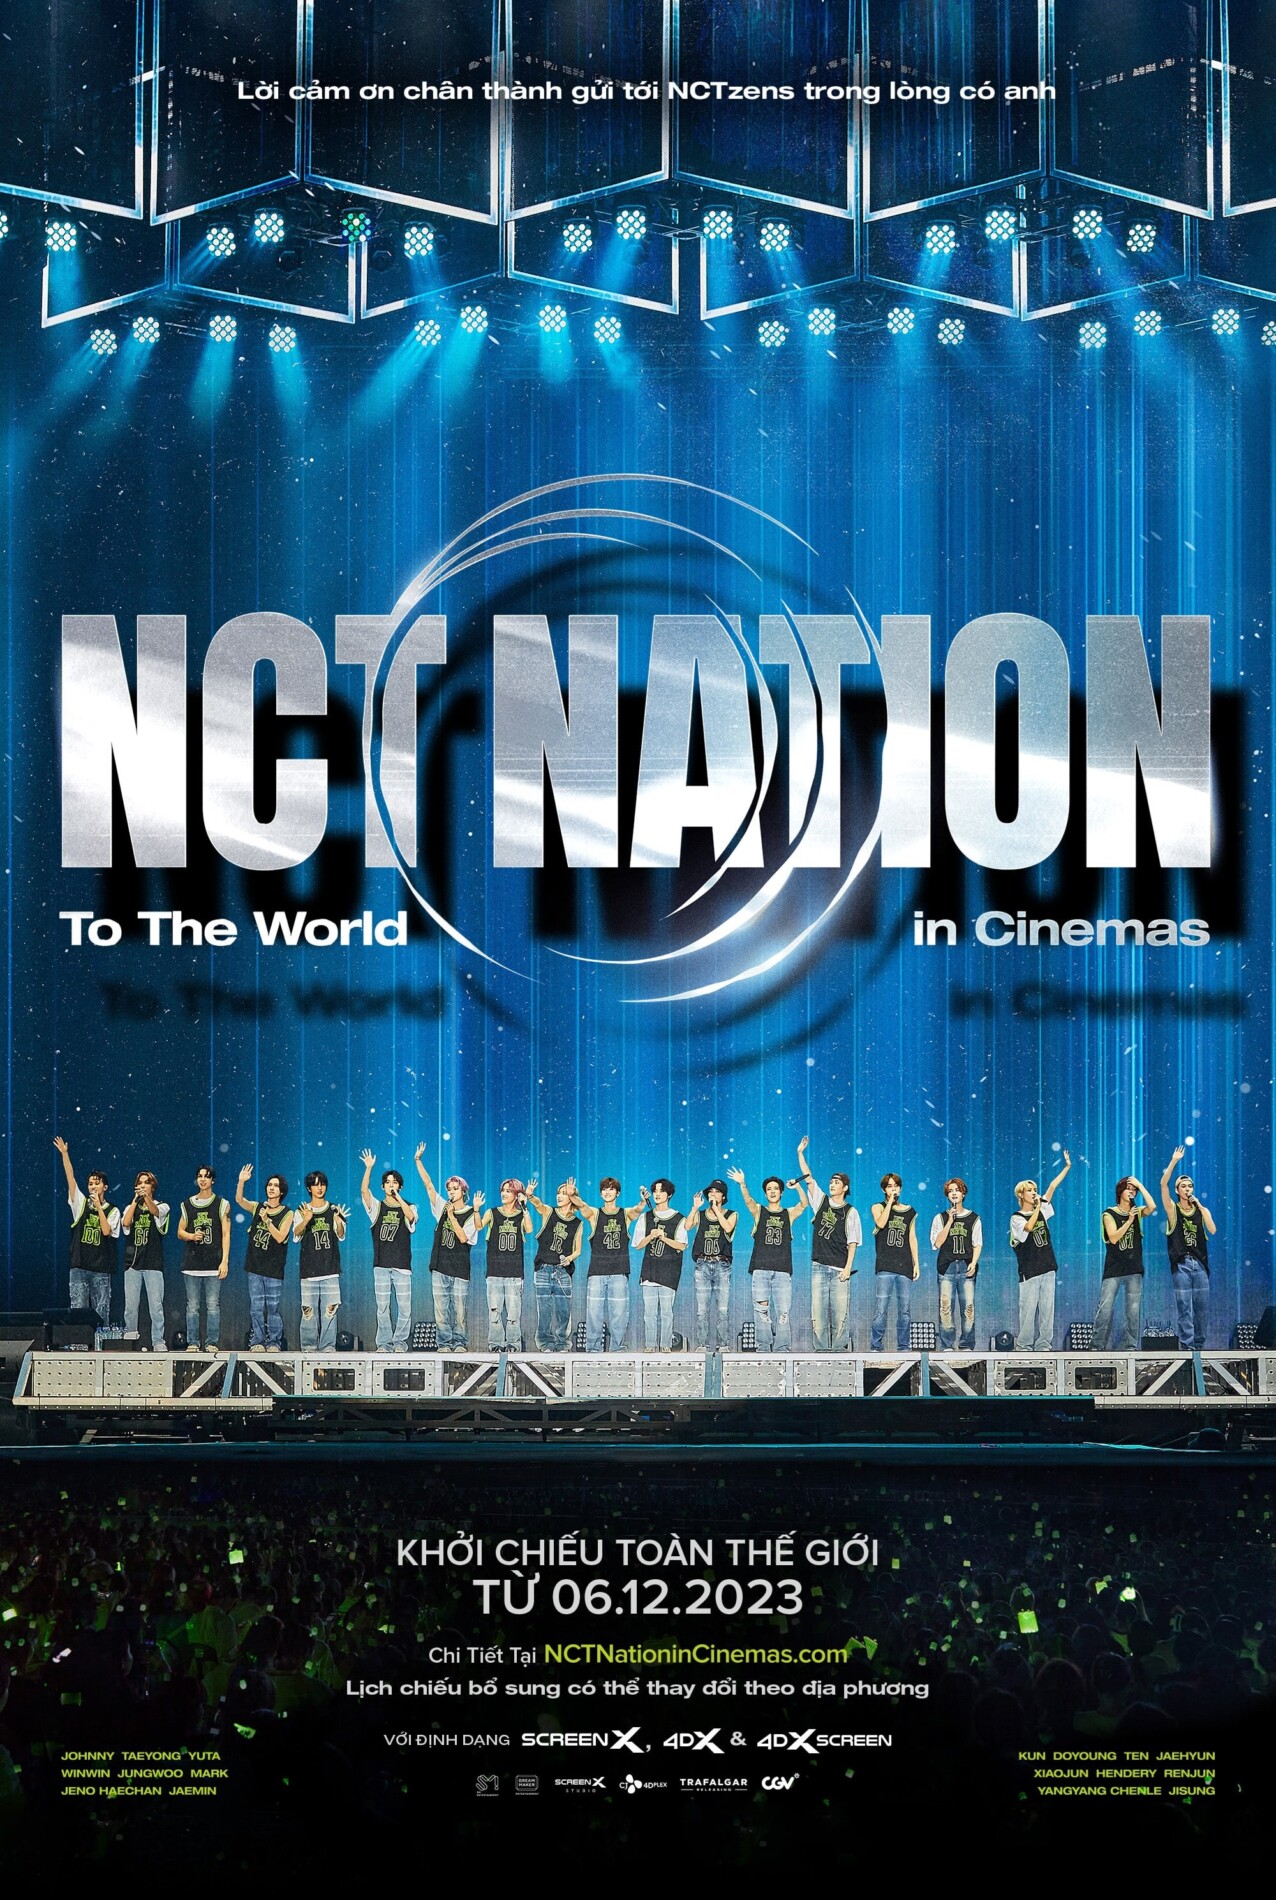 NCT NATION: TO THE WORLD